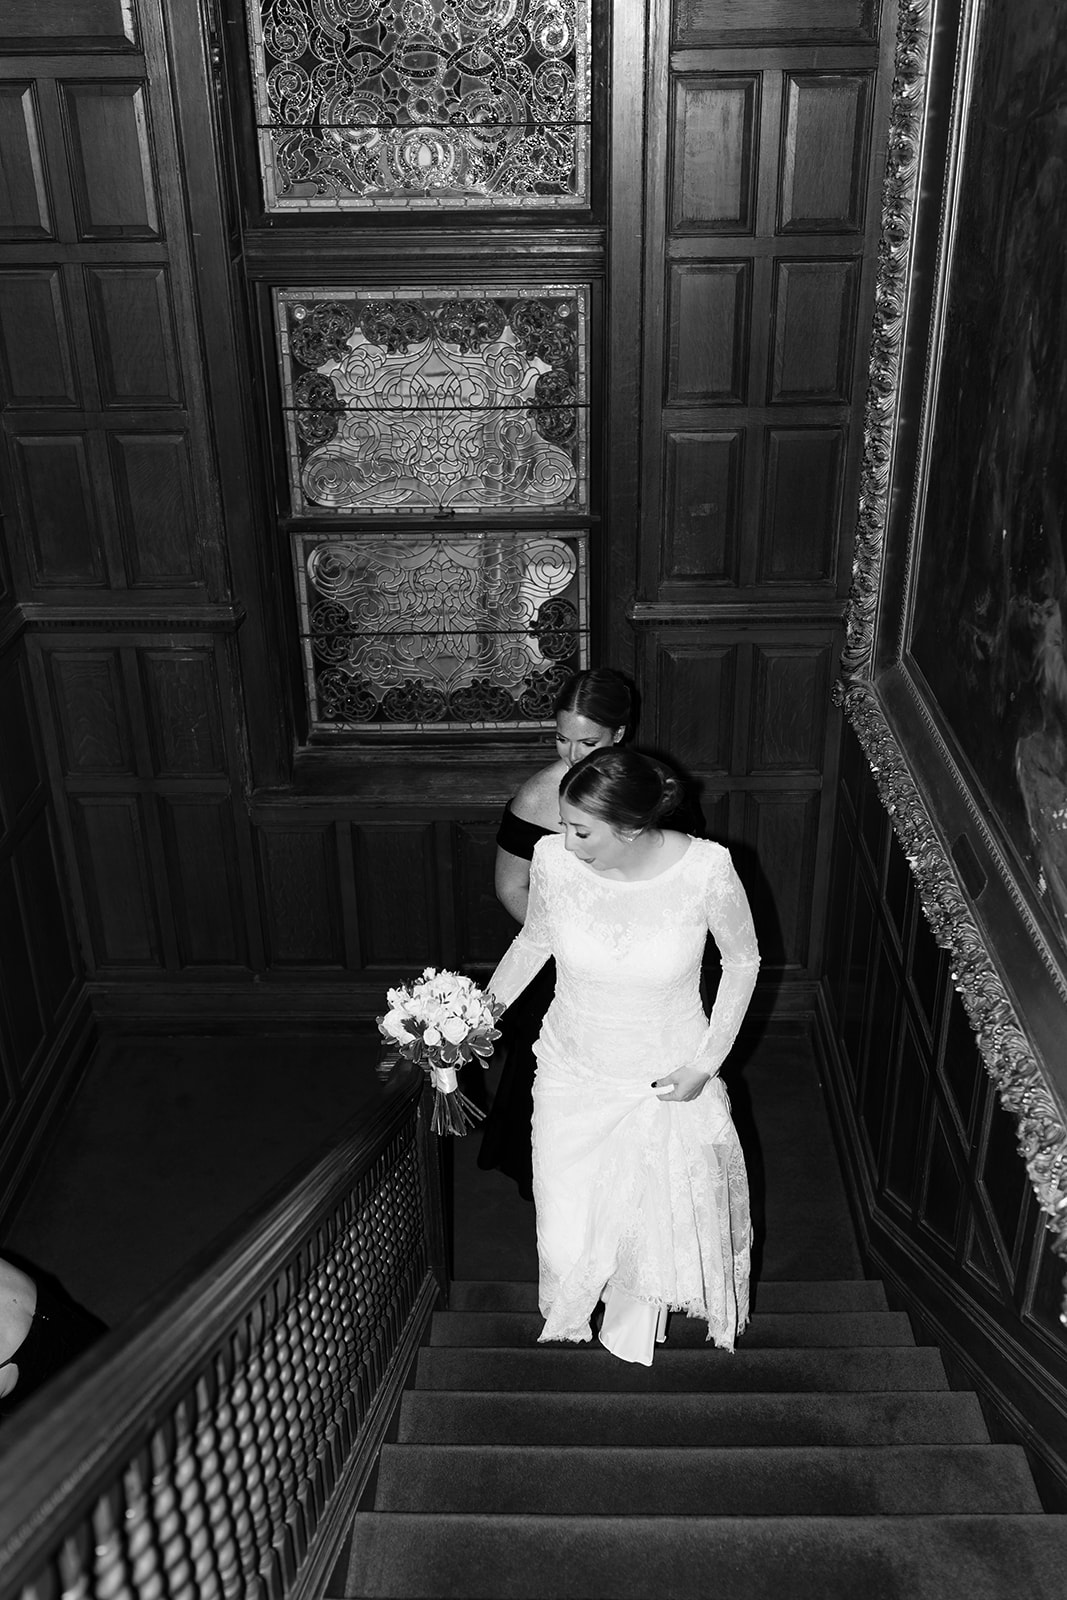 Stunning bride and and bridesmaids come up the stairs towards the elegant wedding ceremony